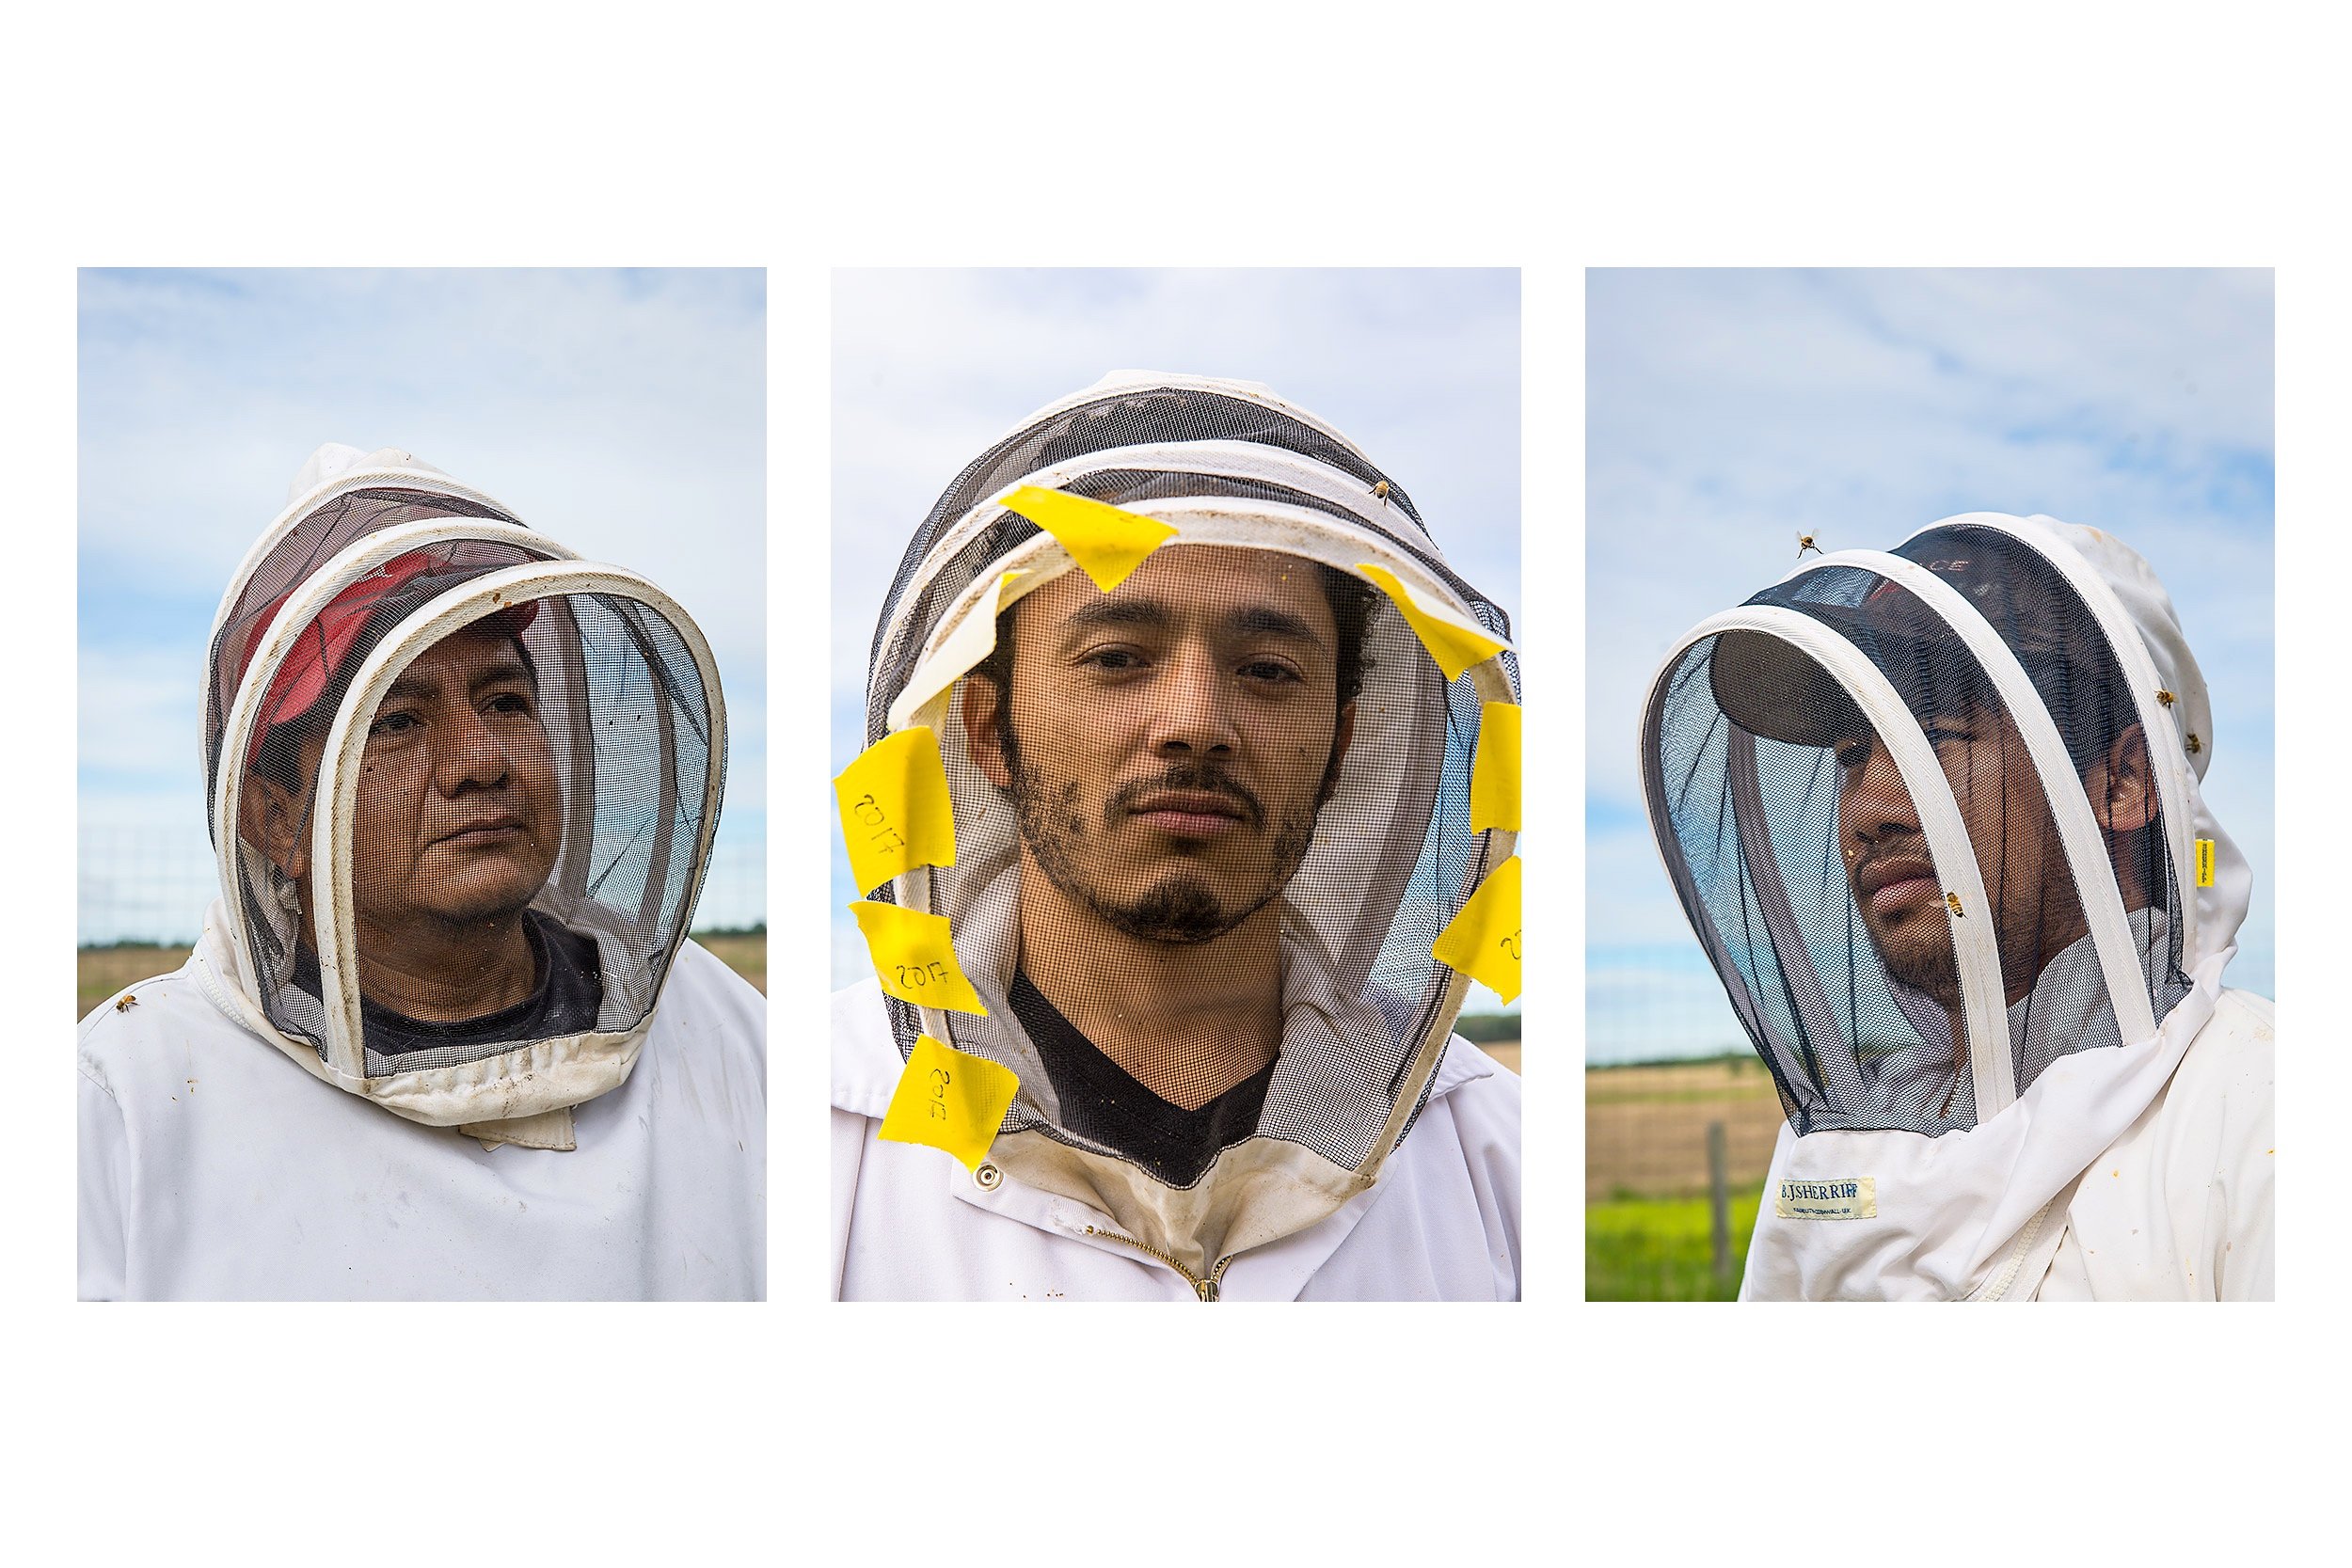  For the past 19 years, Bosco Montalvan Lopez (at left), 42, has been making the trip to Northern Alberta from his native Nicaragua to work as a beekeeper.  Although Jose Miguel Rueda Maldonado (center), 28, works and shares a trailer home with two o